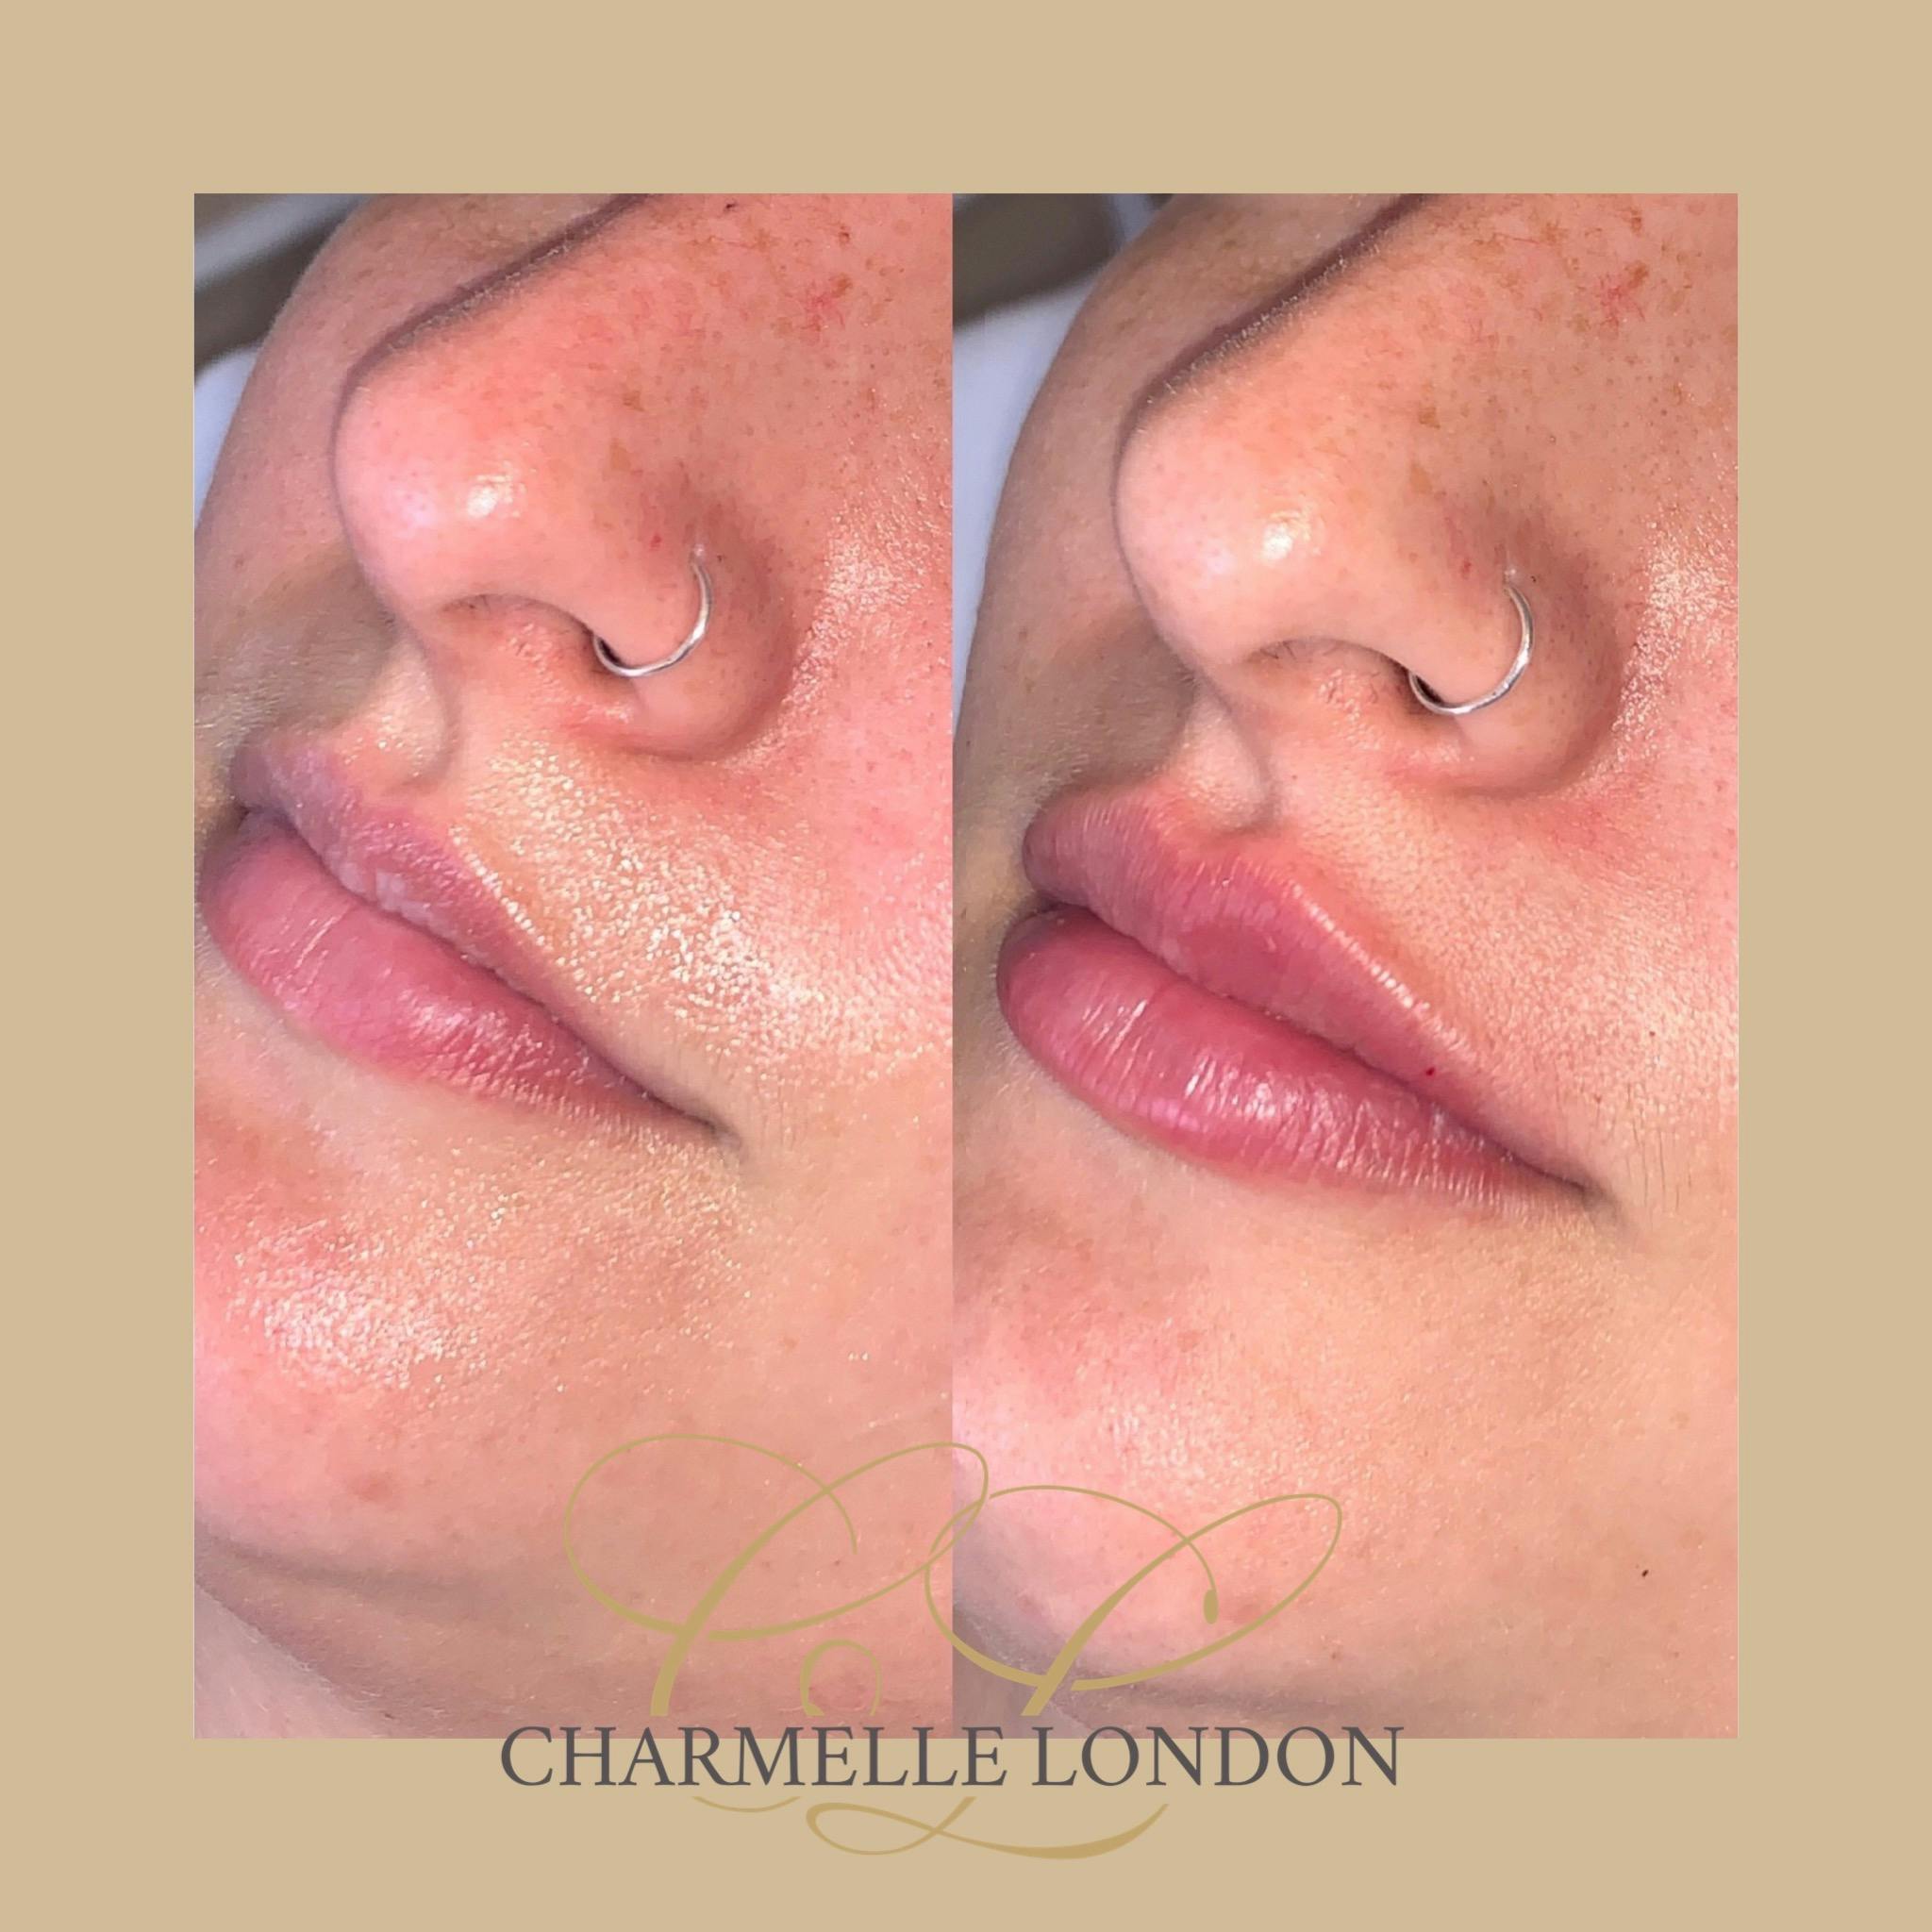 Lips are an important part of facial beauty and can add appeal and youth to a face when they are well balanced with other facial features. Lip fillers can be used to plump, enhance or reshape thin or ageing lips with natural yet transforming results.